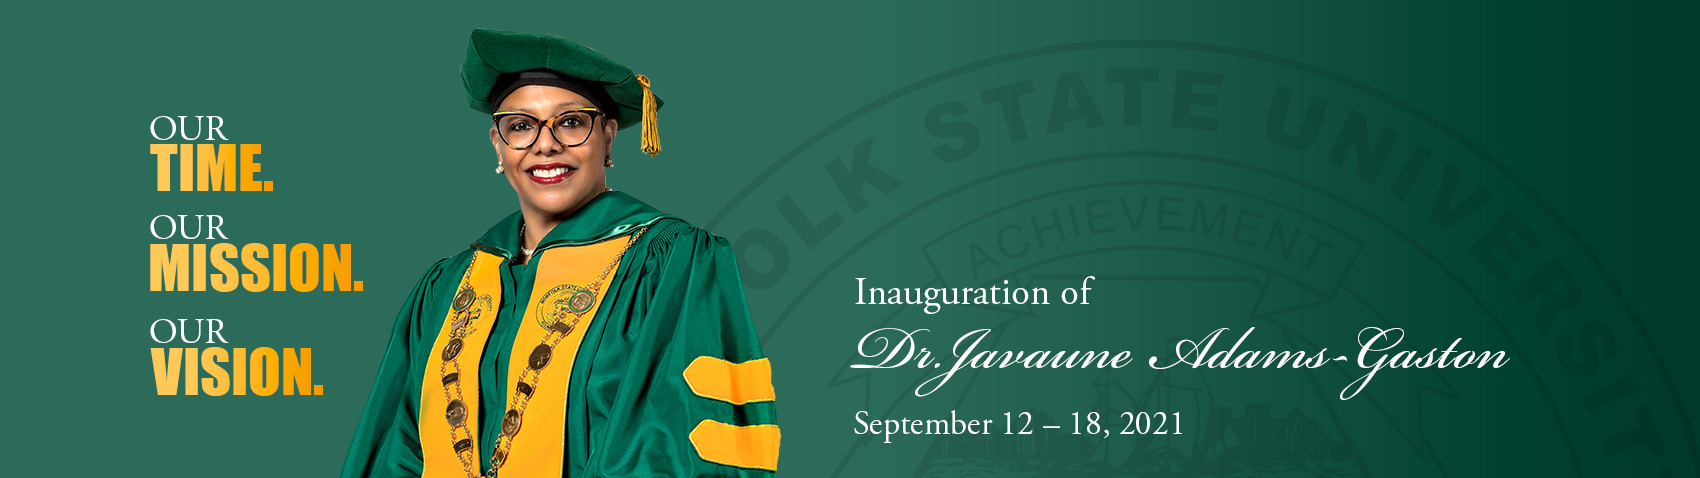 our time. our mission. our vision - inauguration of Javaune Adams-Gaston • September 12 -18, 2021